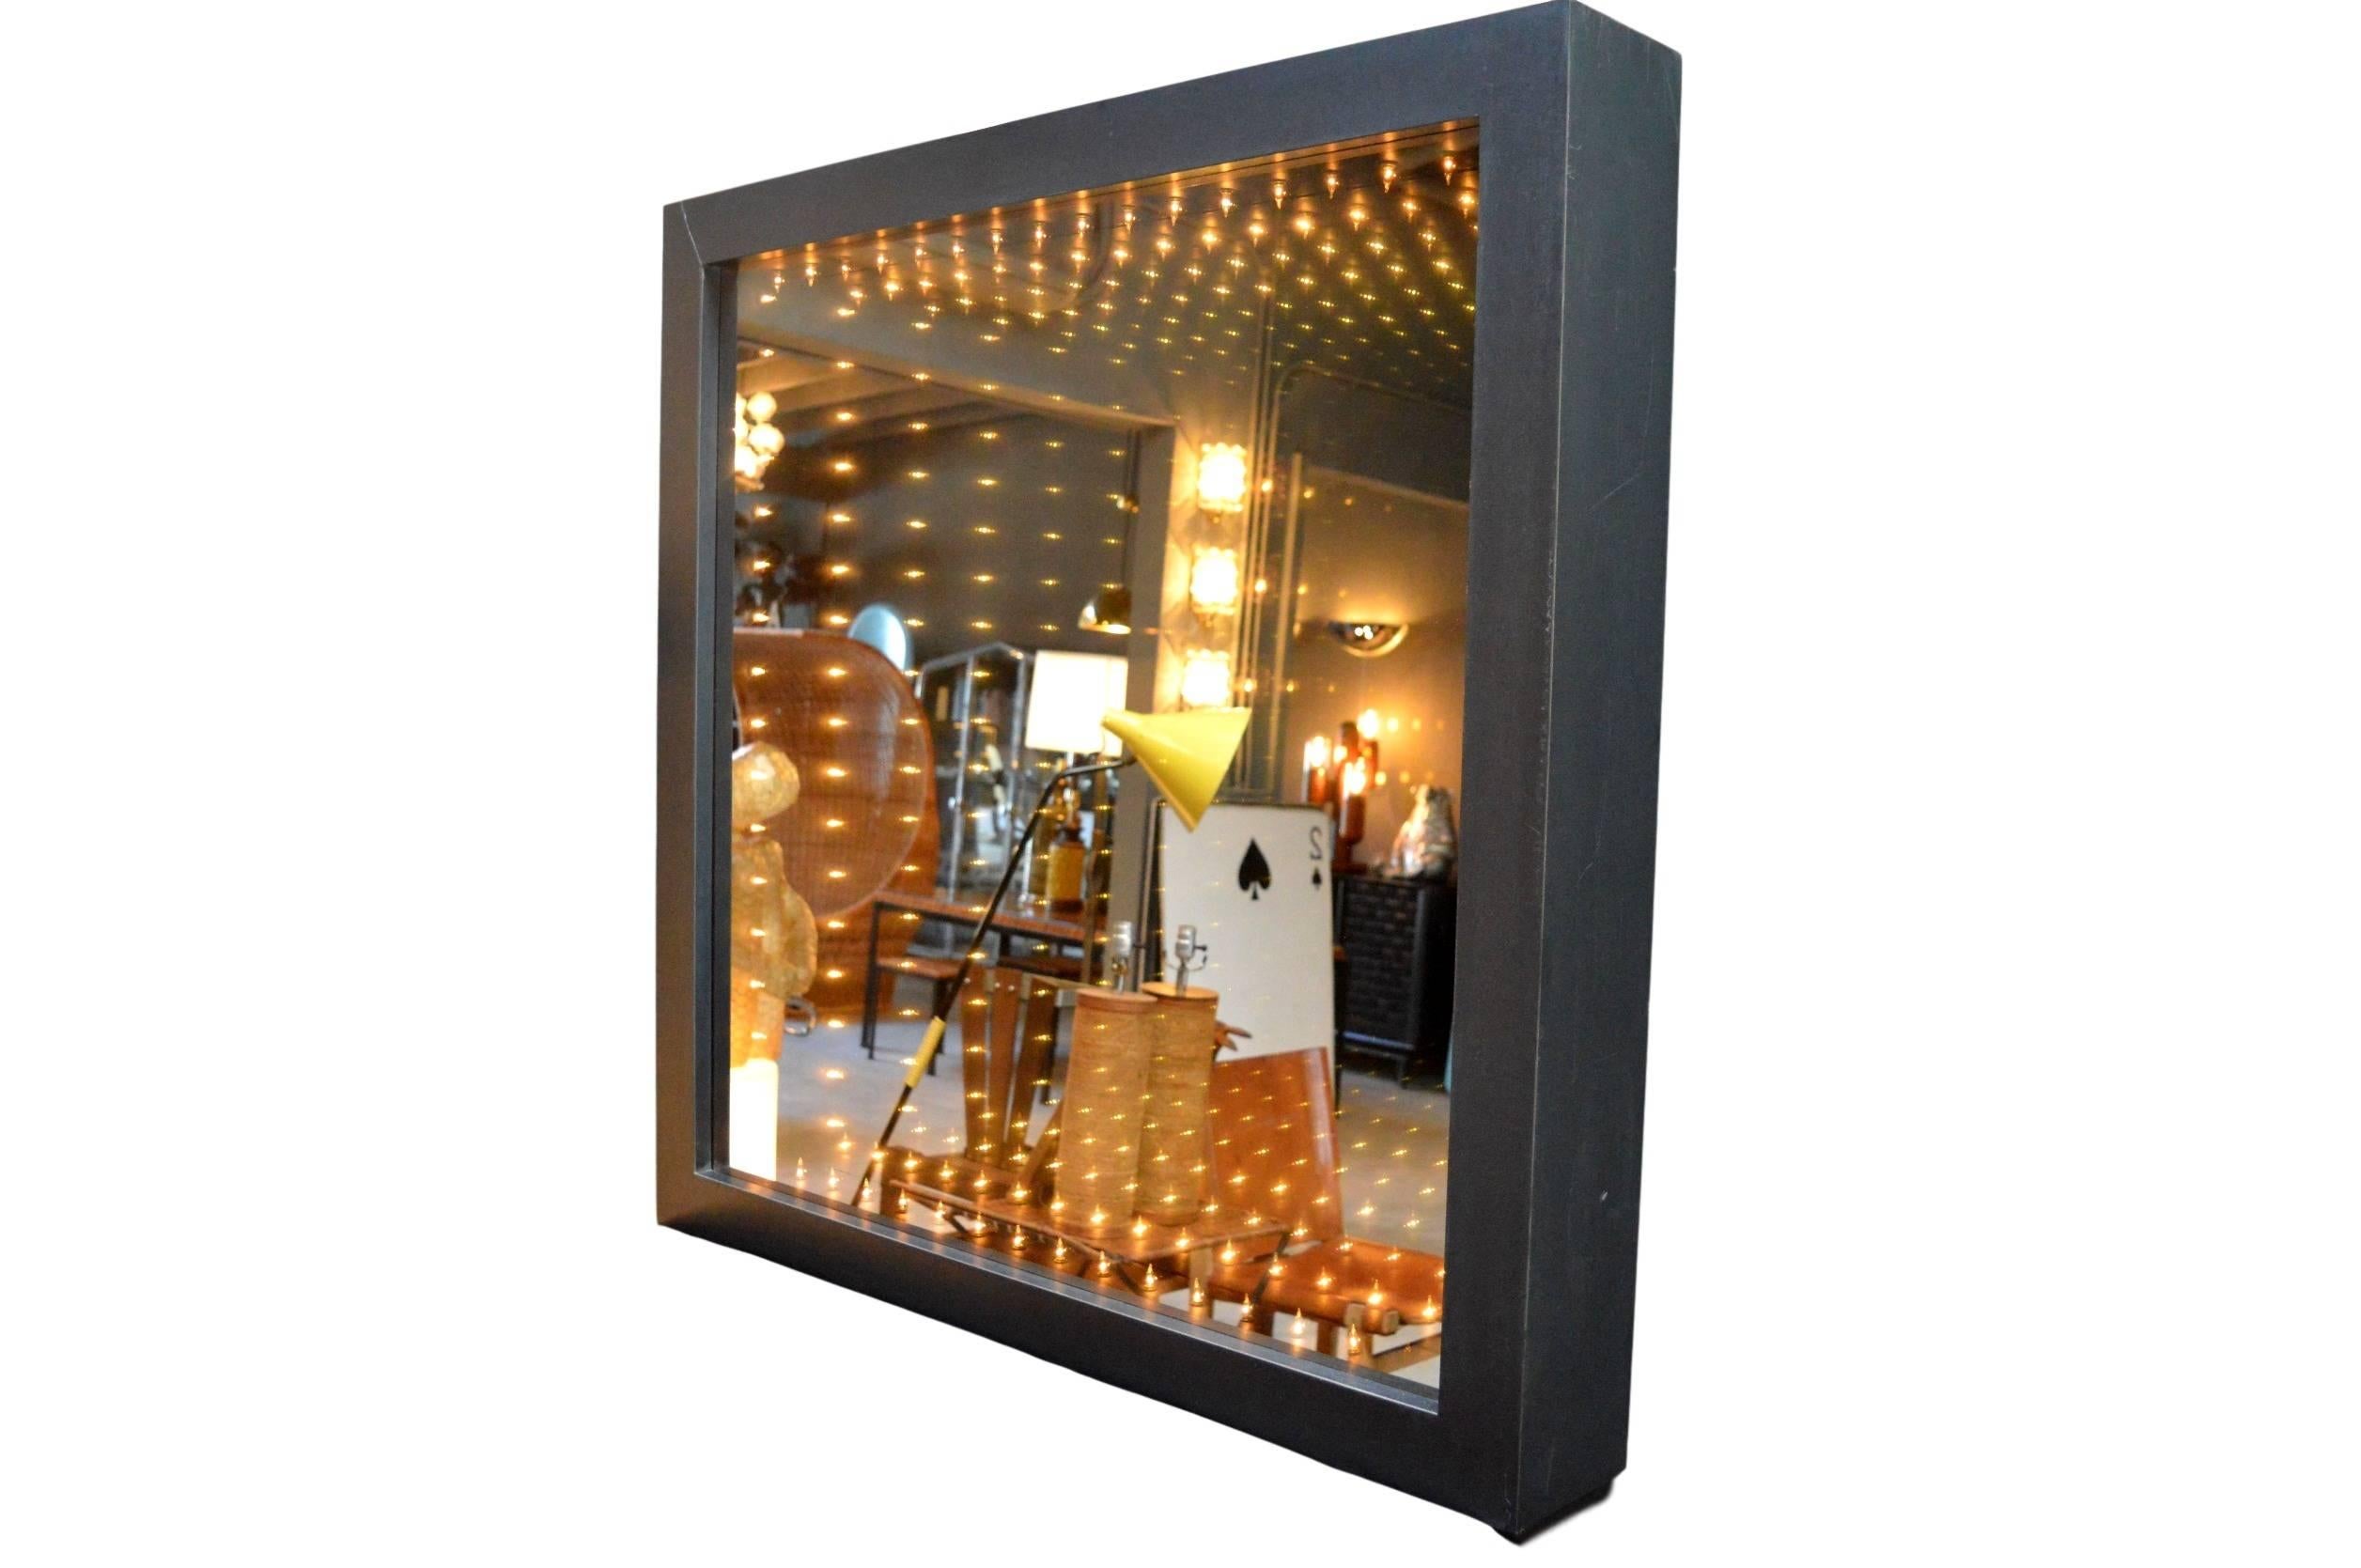 Massive vintage infinity mirror with black frame. Functions as a mirror when turned off. Great ambient background light for your home or business. Extremely rare size. Fantastic piece of wall art!